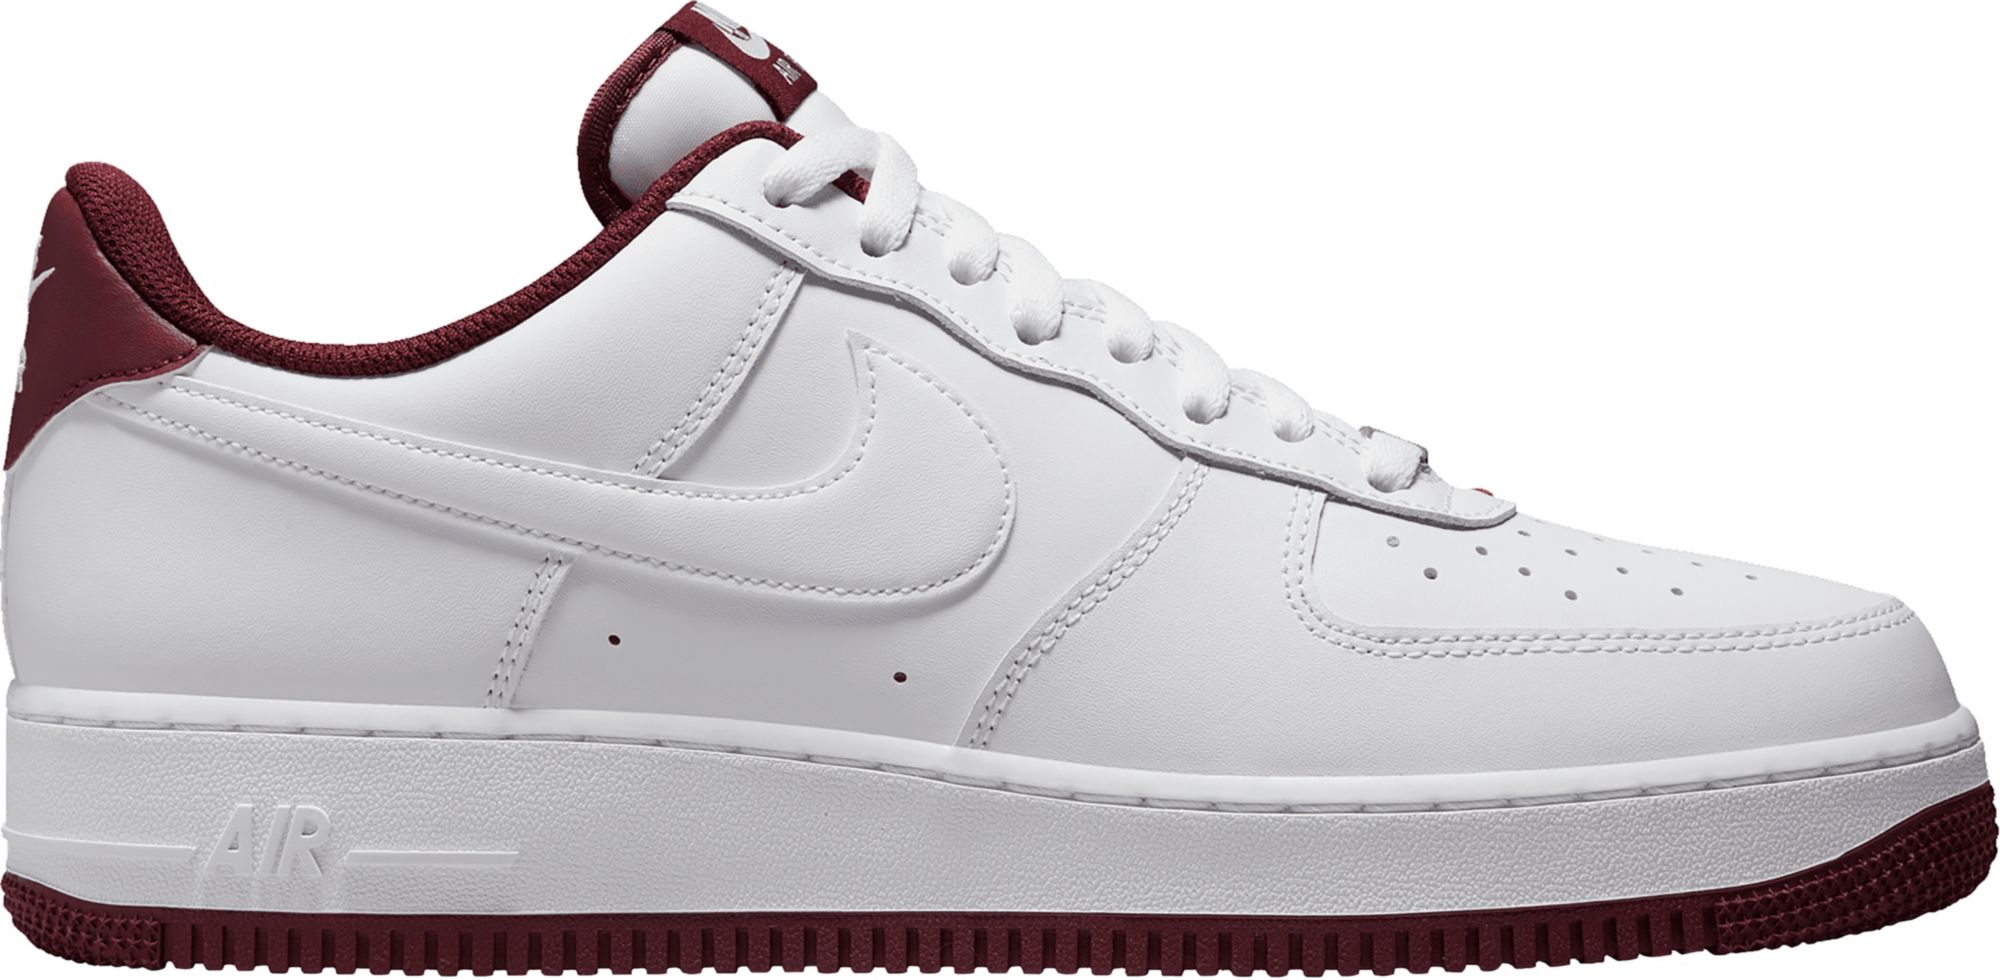 what stores can you buy air force ones